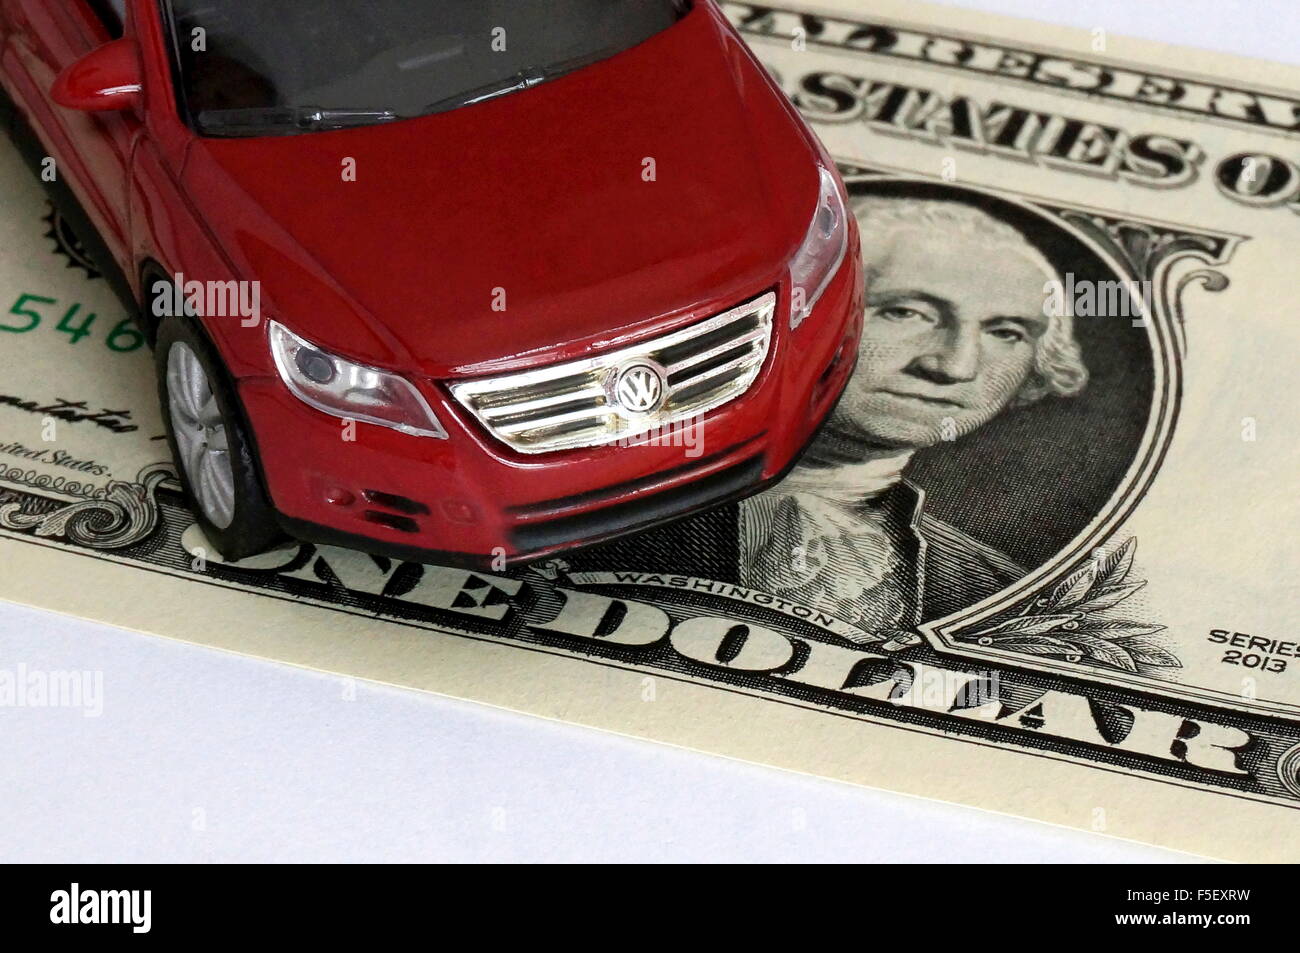 ILLUSTRATION - A Volkswagen car model 'VW Tiguan' on a dollar bill. The photo was taken on 15 October 2015. Photo: S. Steinach - NO WIRE SERVICE - Stock Photo